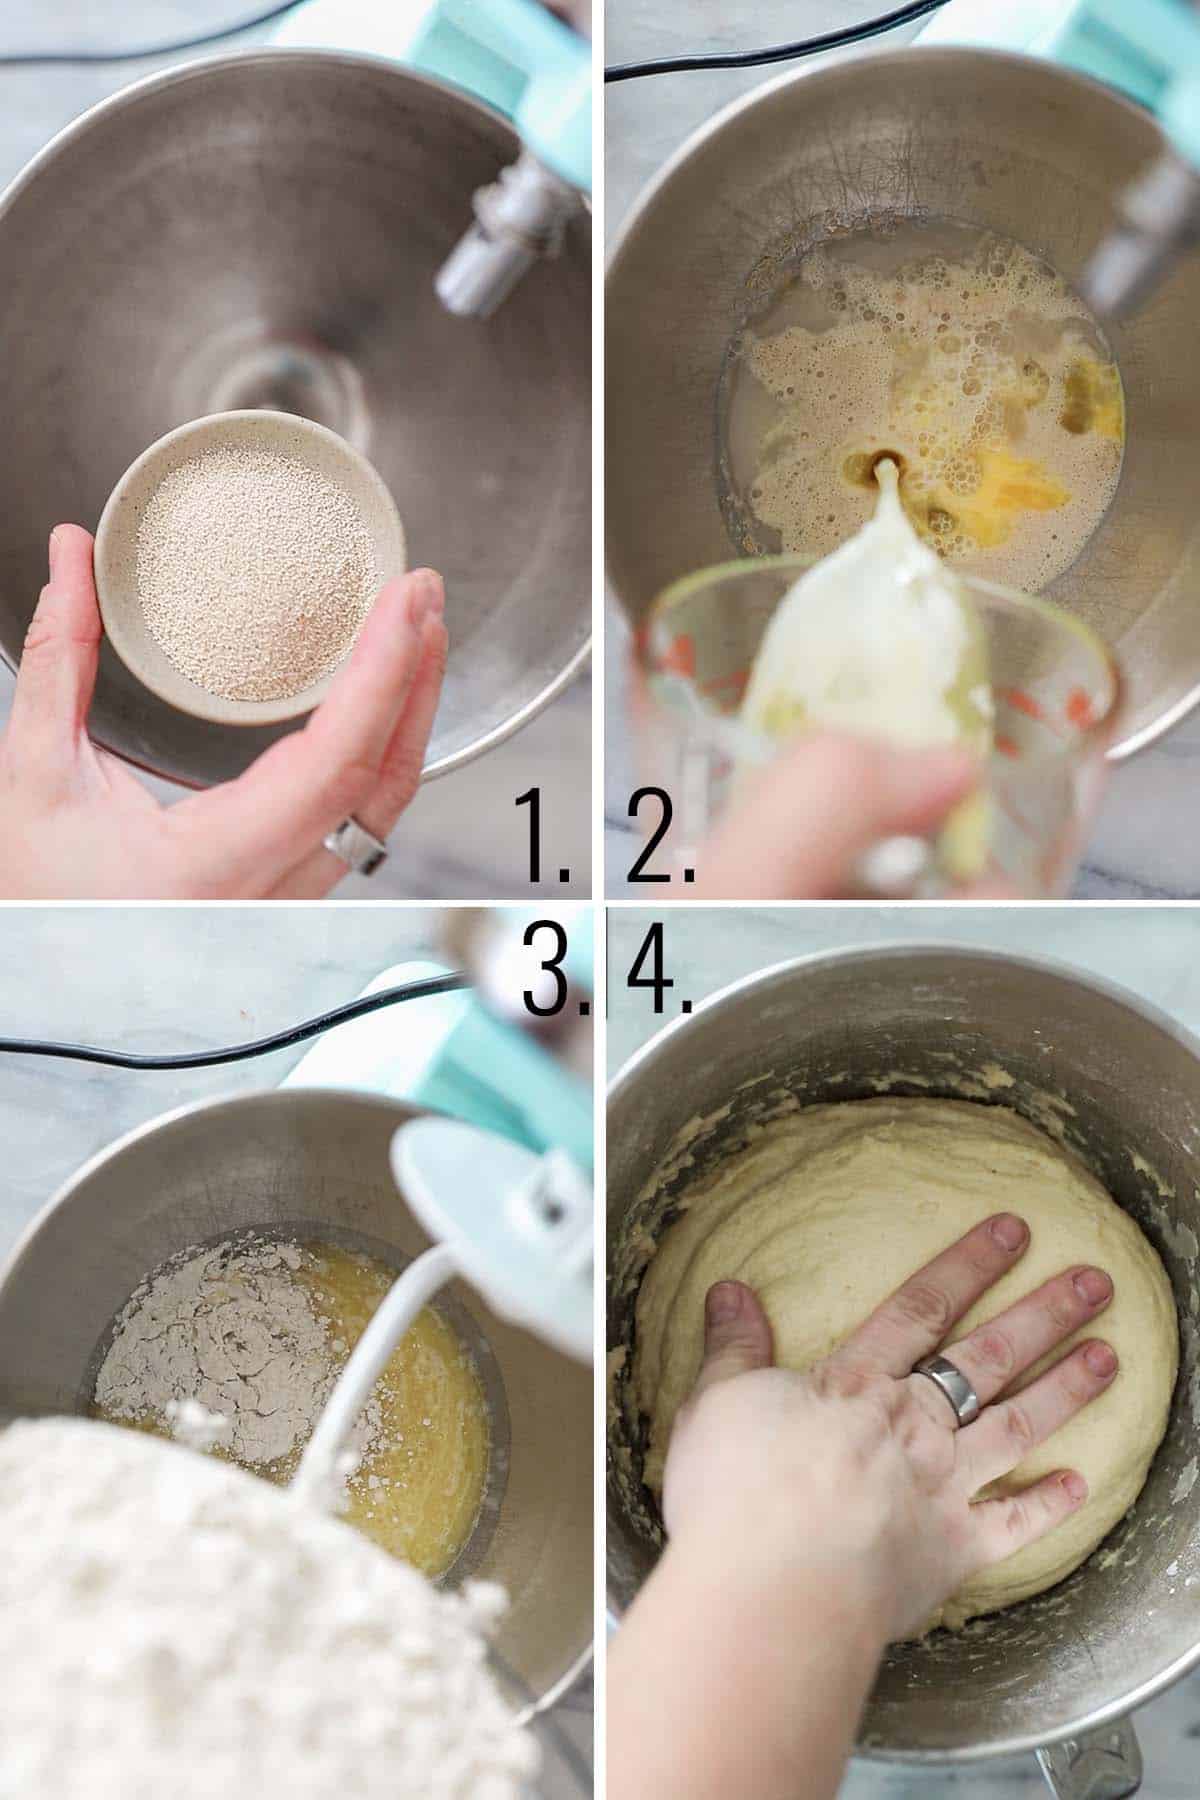 How to make sweet roll dough.